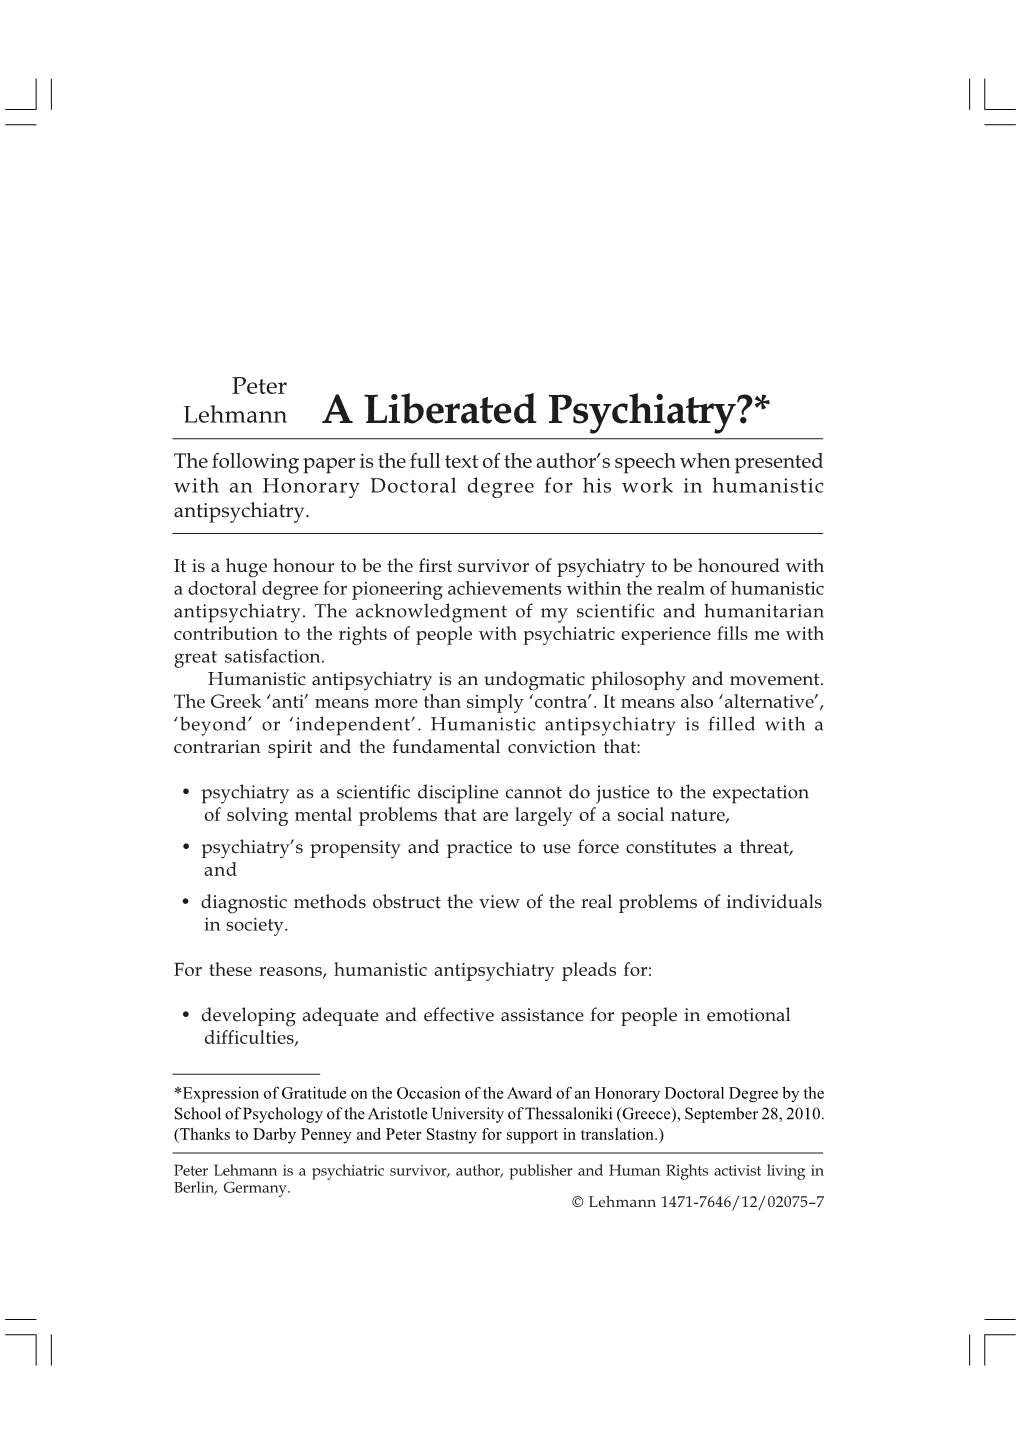 A Liberated Psychiatry?*